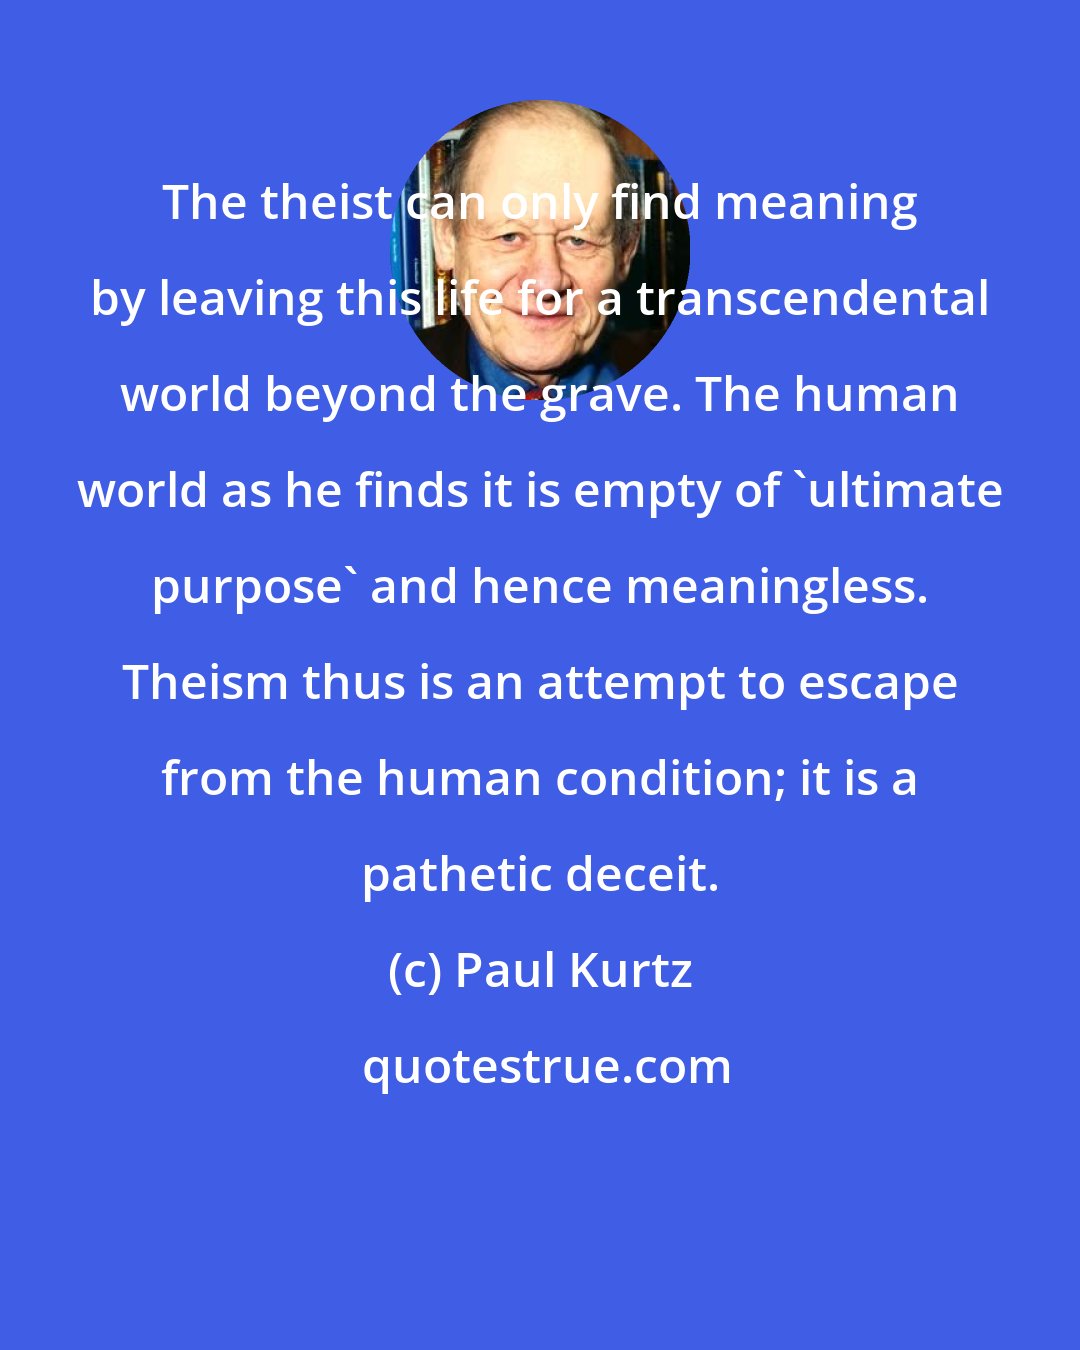 Paul Kurtz: The theist can only find meaning by leaving this life for a transcendental world beyond the grave. The human world as he finds it is empty of 'ultimate purpose' and hence meaningless. Theism thus is an attempt to escape from the human condition; it is a pathetic deceit.